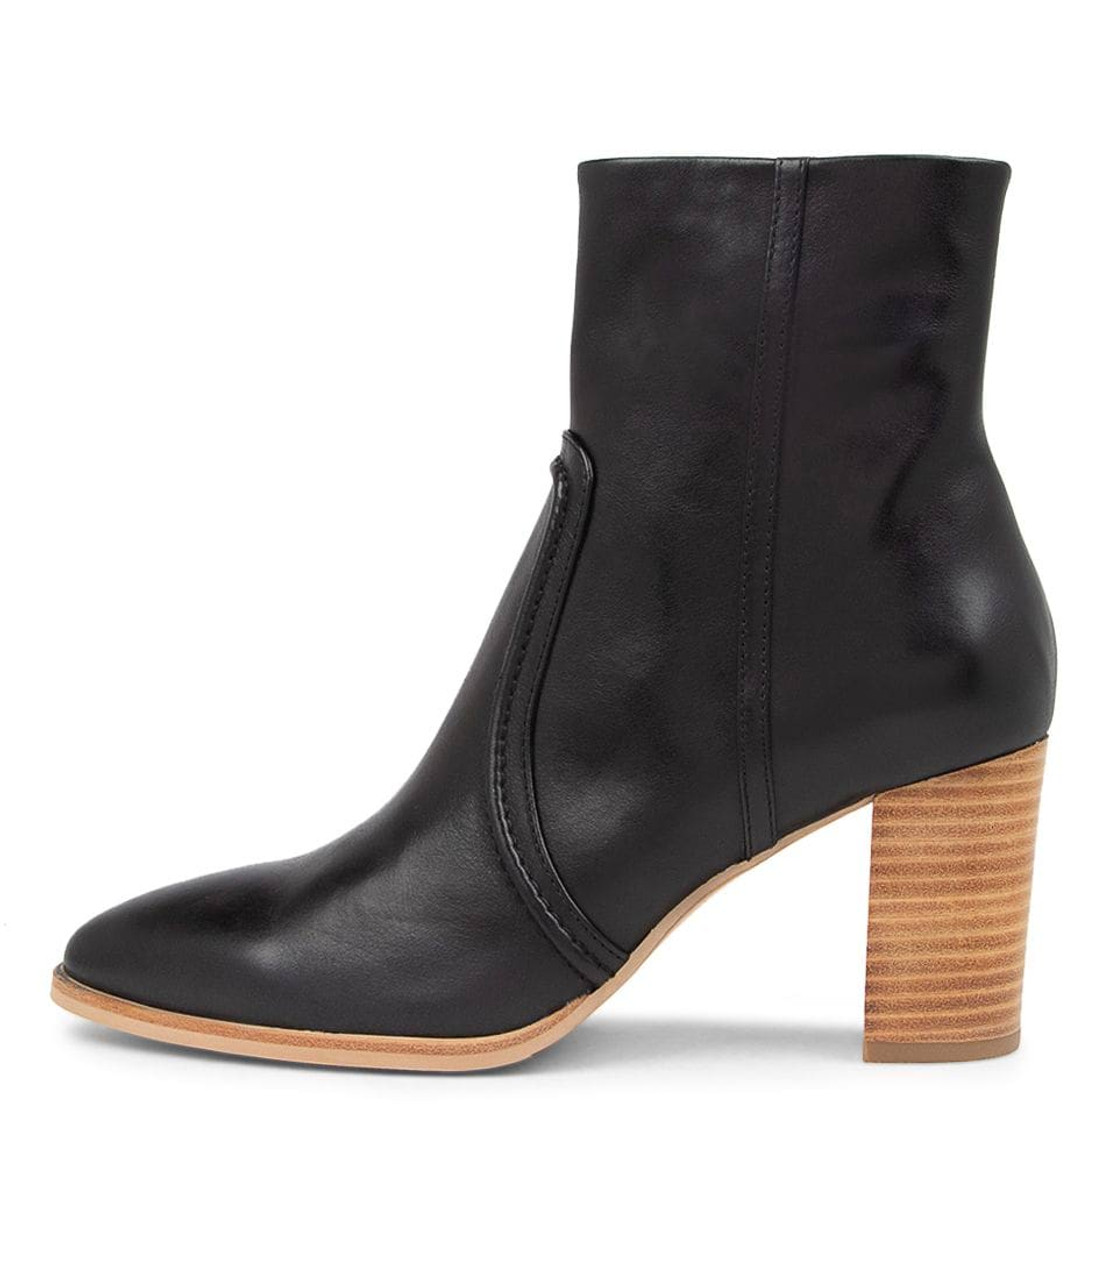 Anahi Black Leather Ankle Boots - Django and Juliette